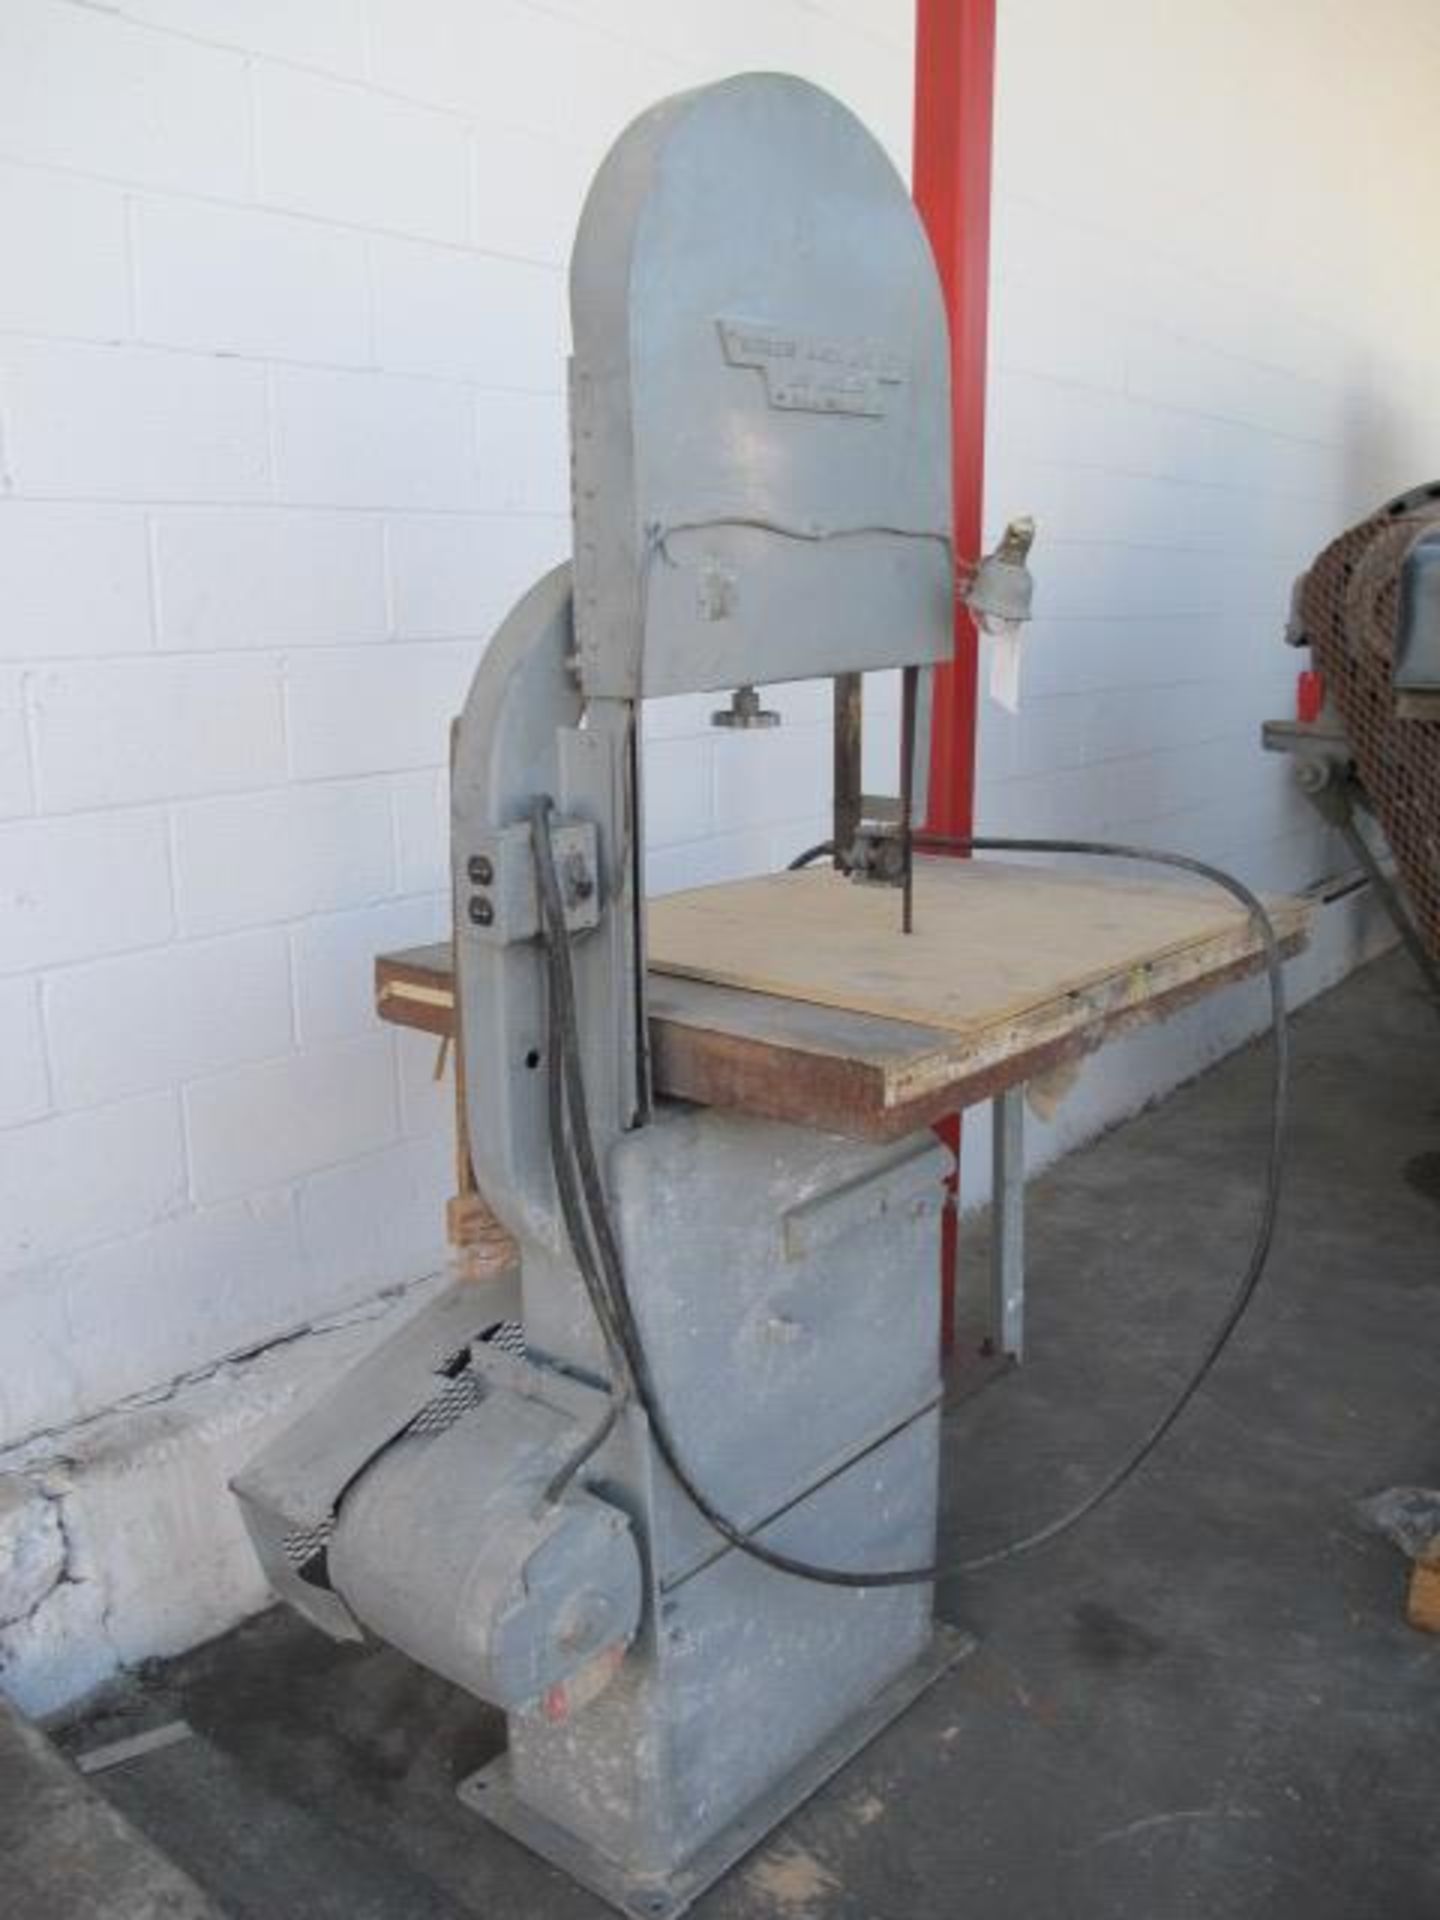 Rodgers mdl. B-20 19" Vertical Band Saw s/n 41371 - Image 2 of 3